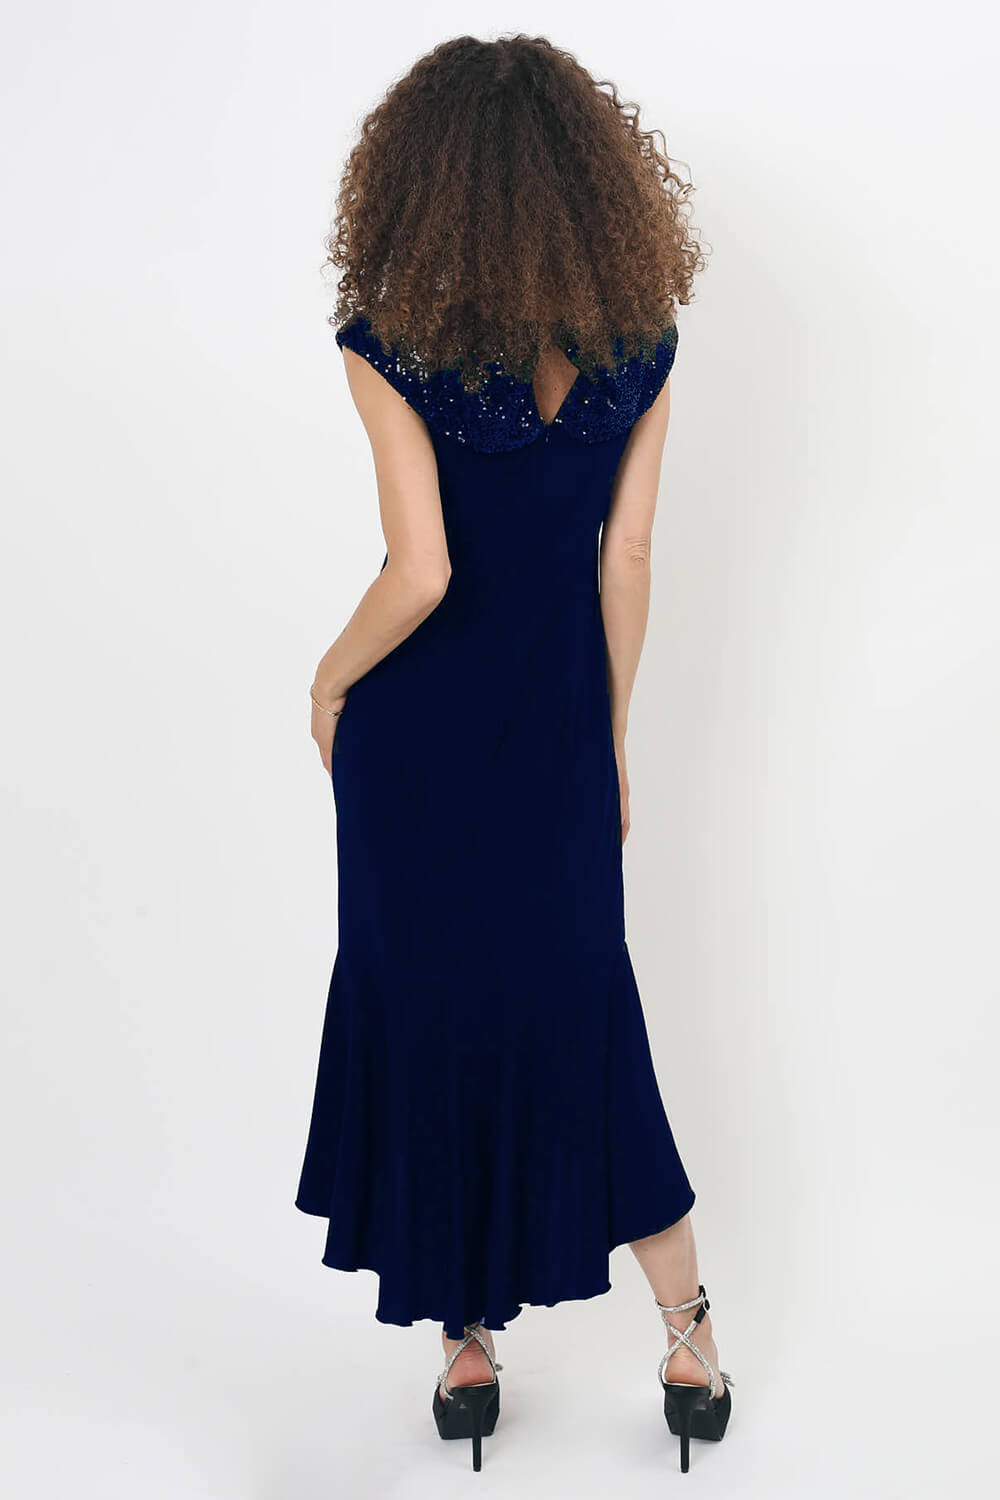 Midnight Blue Julianna Fishtail Sequin Fitted Dress, Image 2 of 3